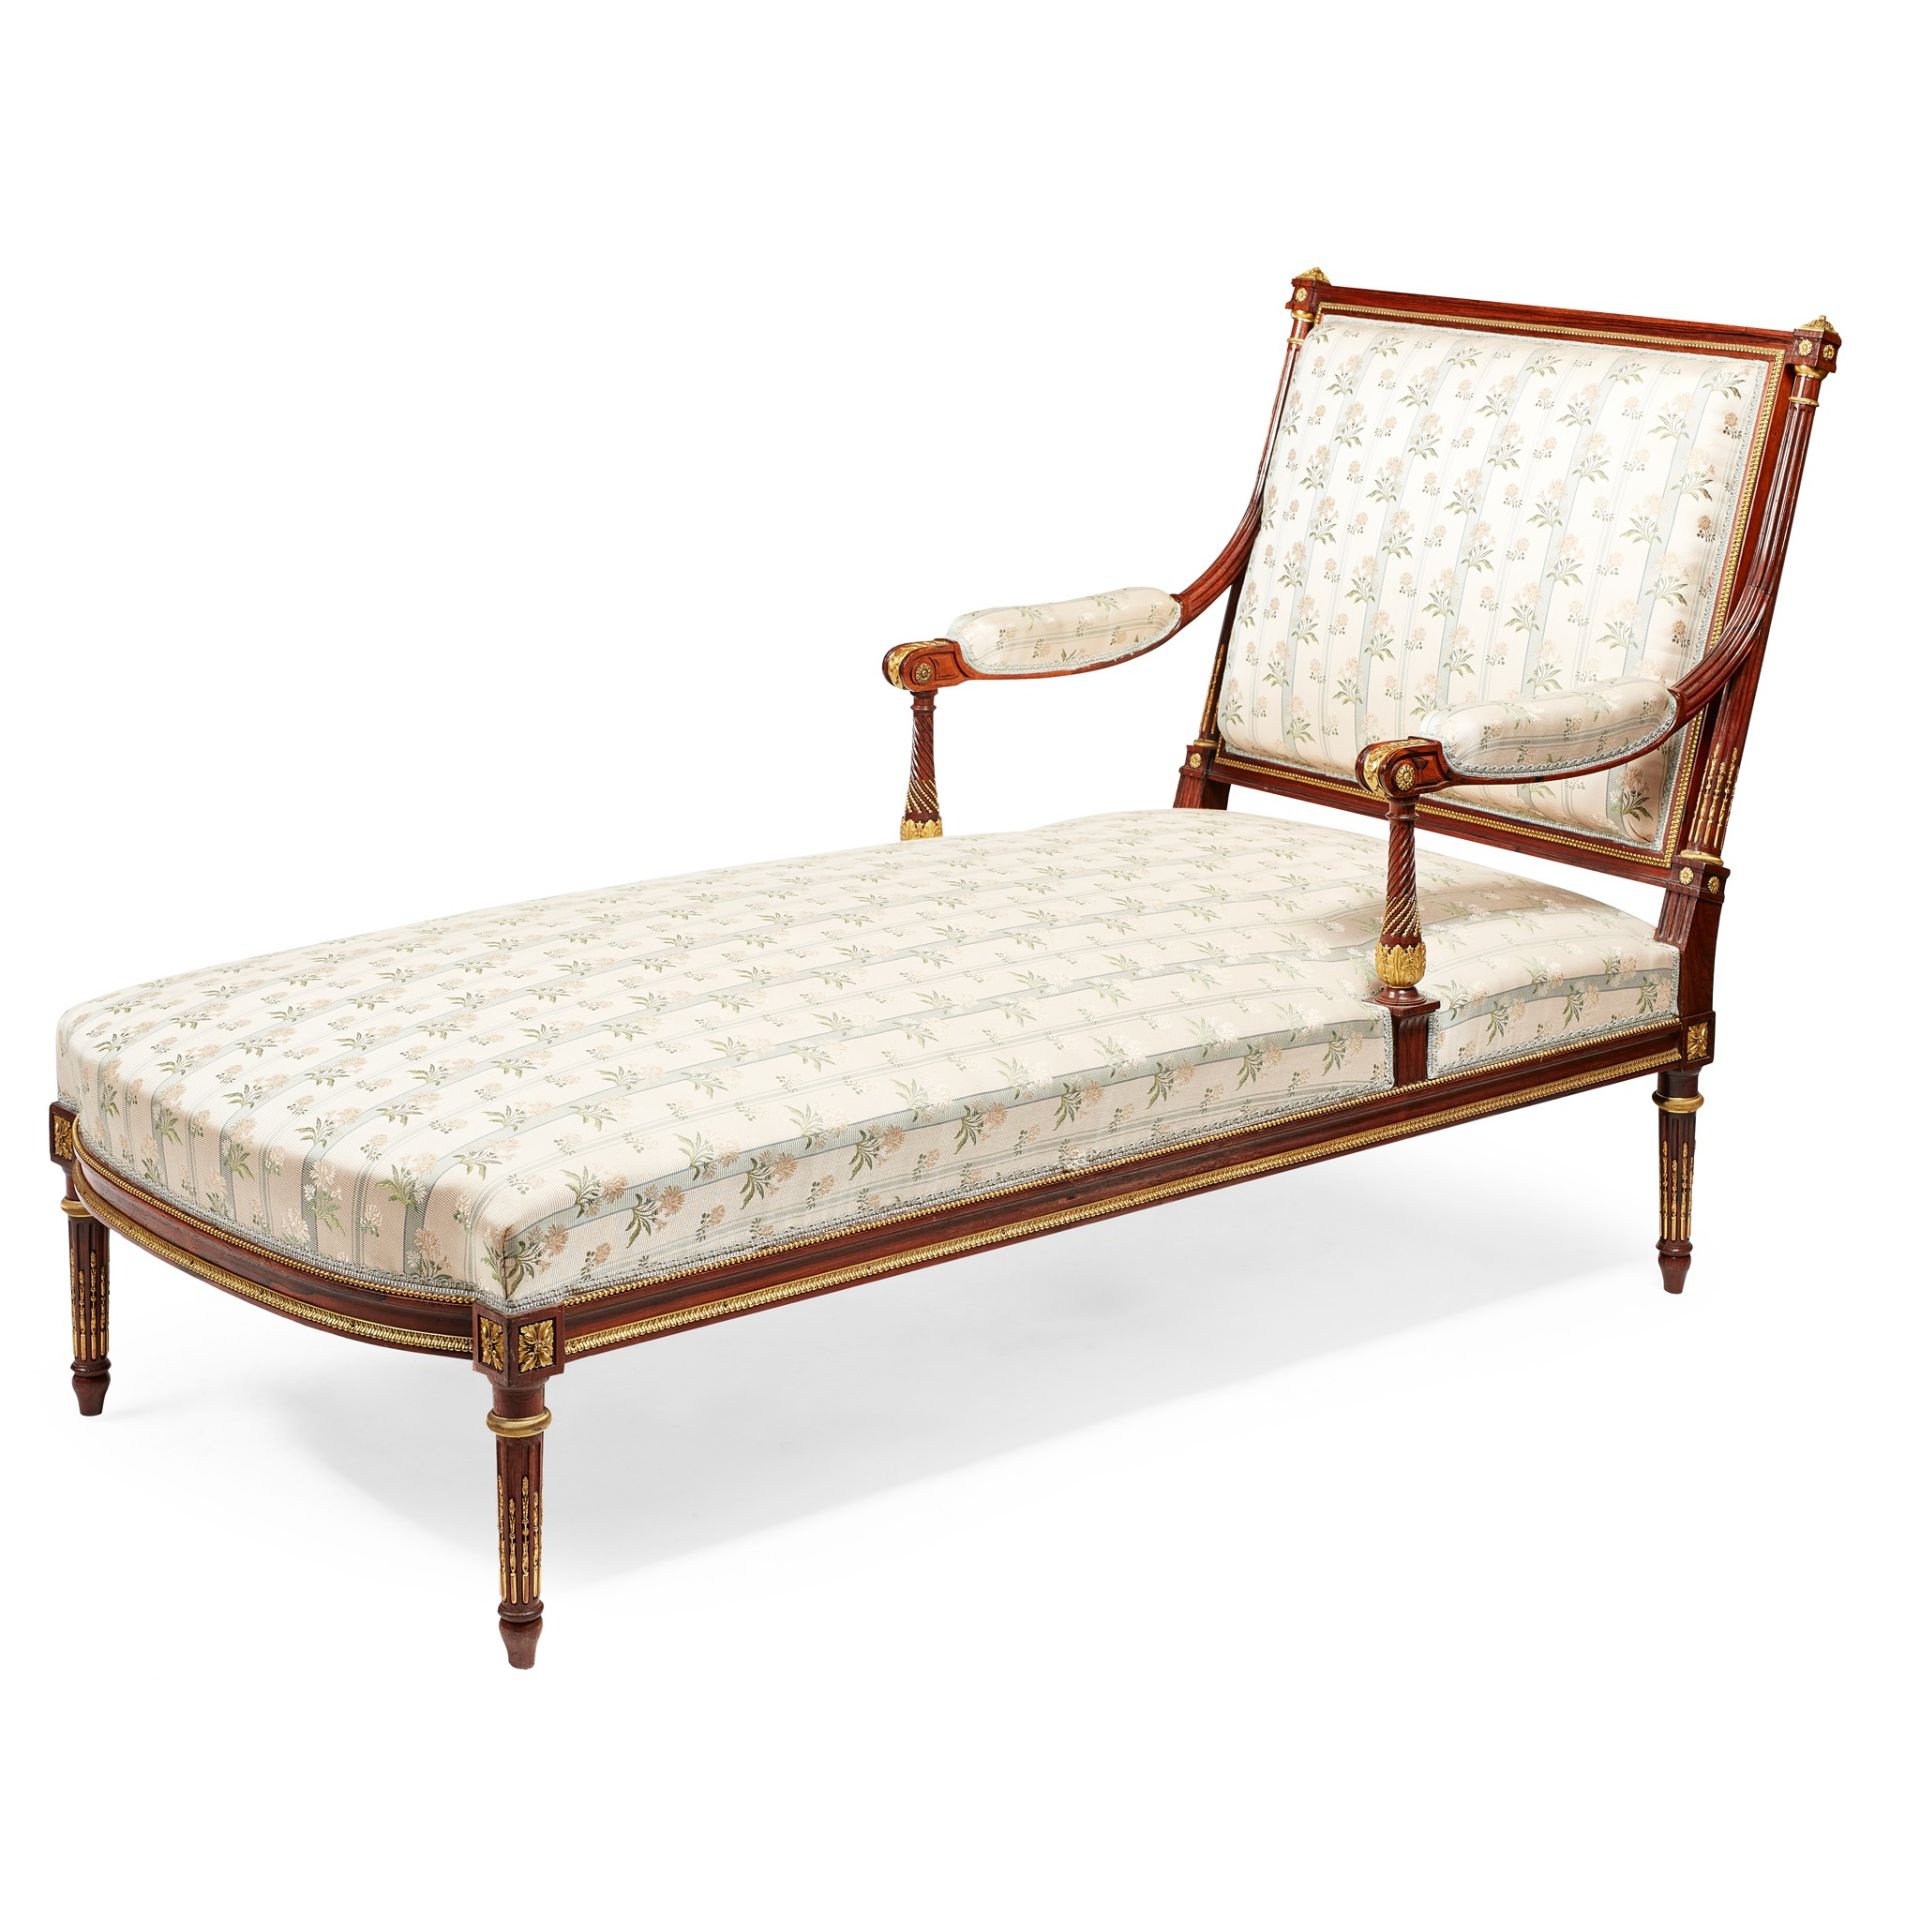 REGENCY STYLE GILT METAL MOUNTED ROSEWOOD DAYBED LATE 19TH CENTURY